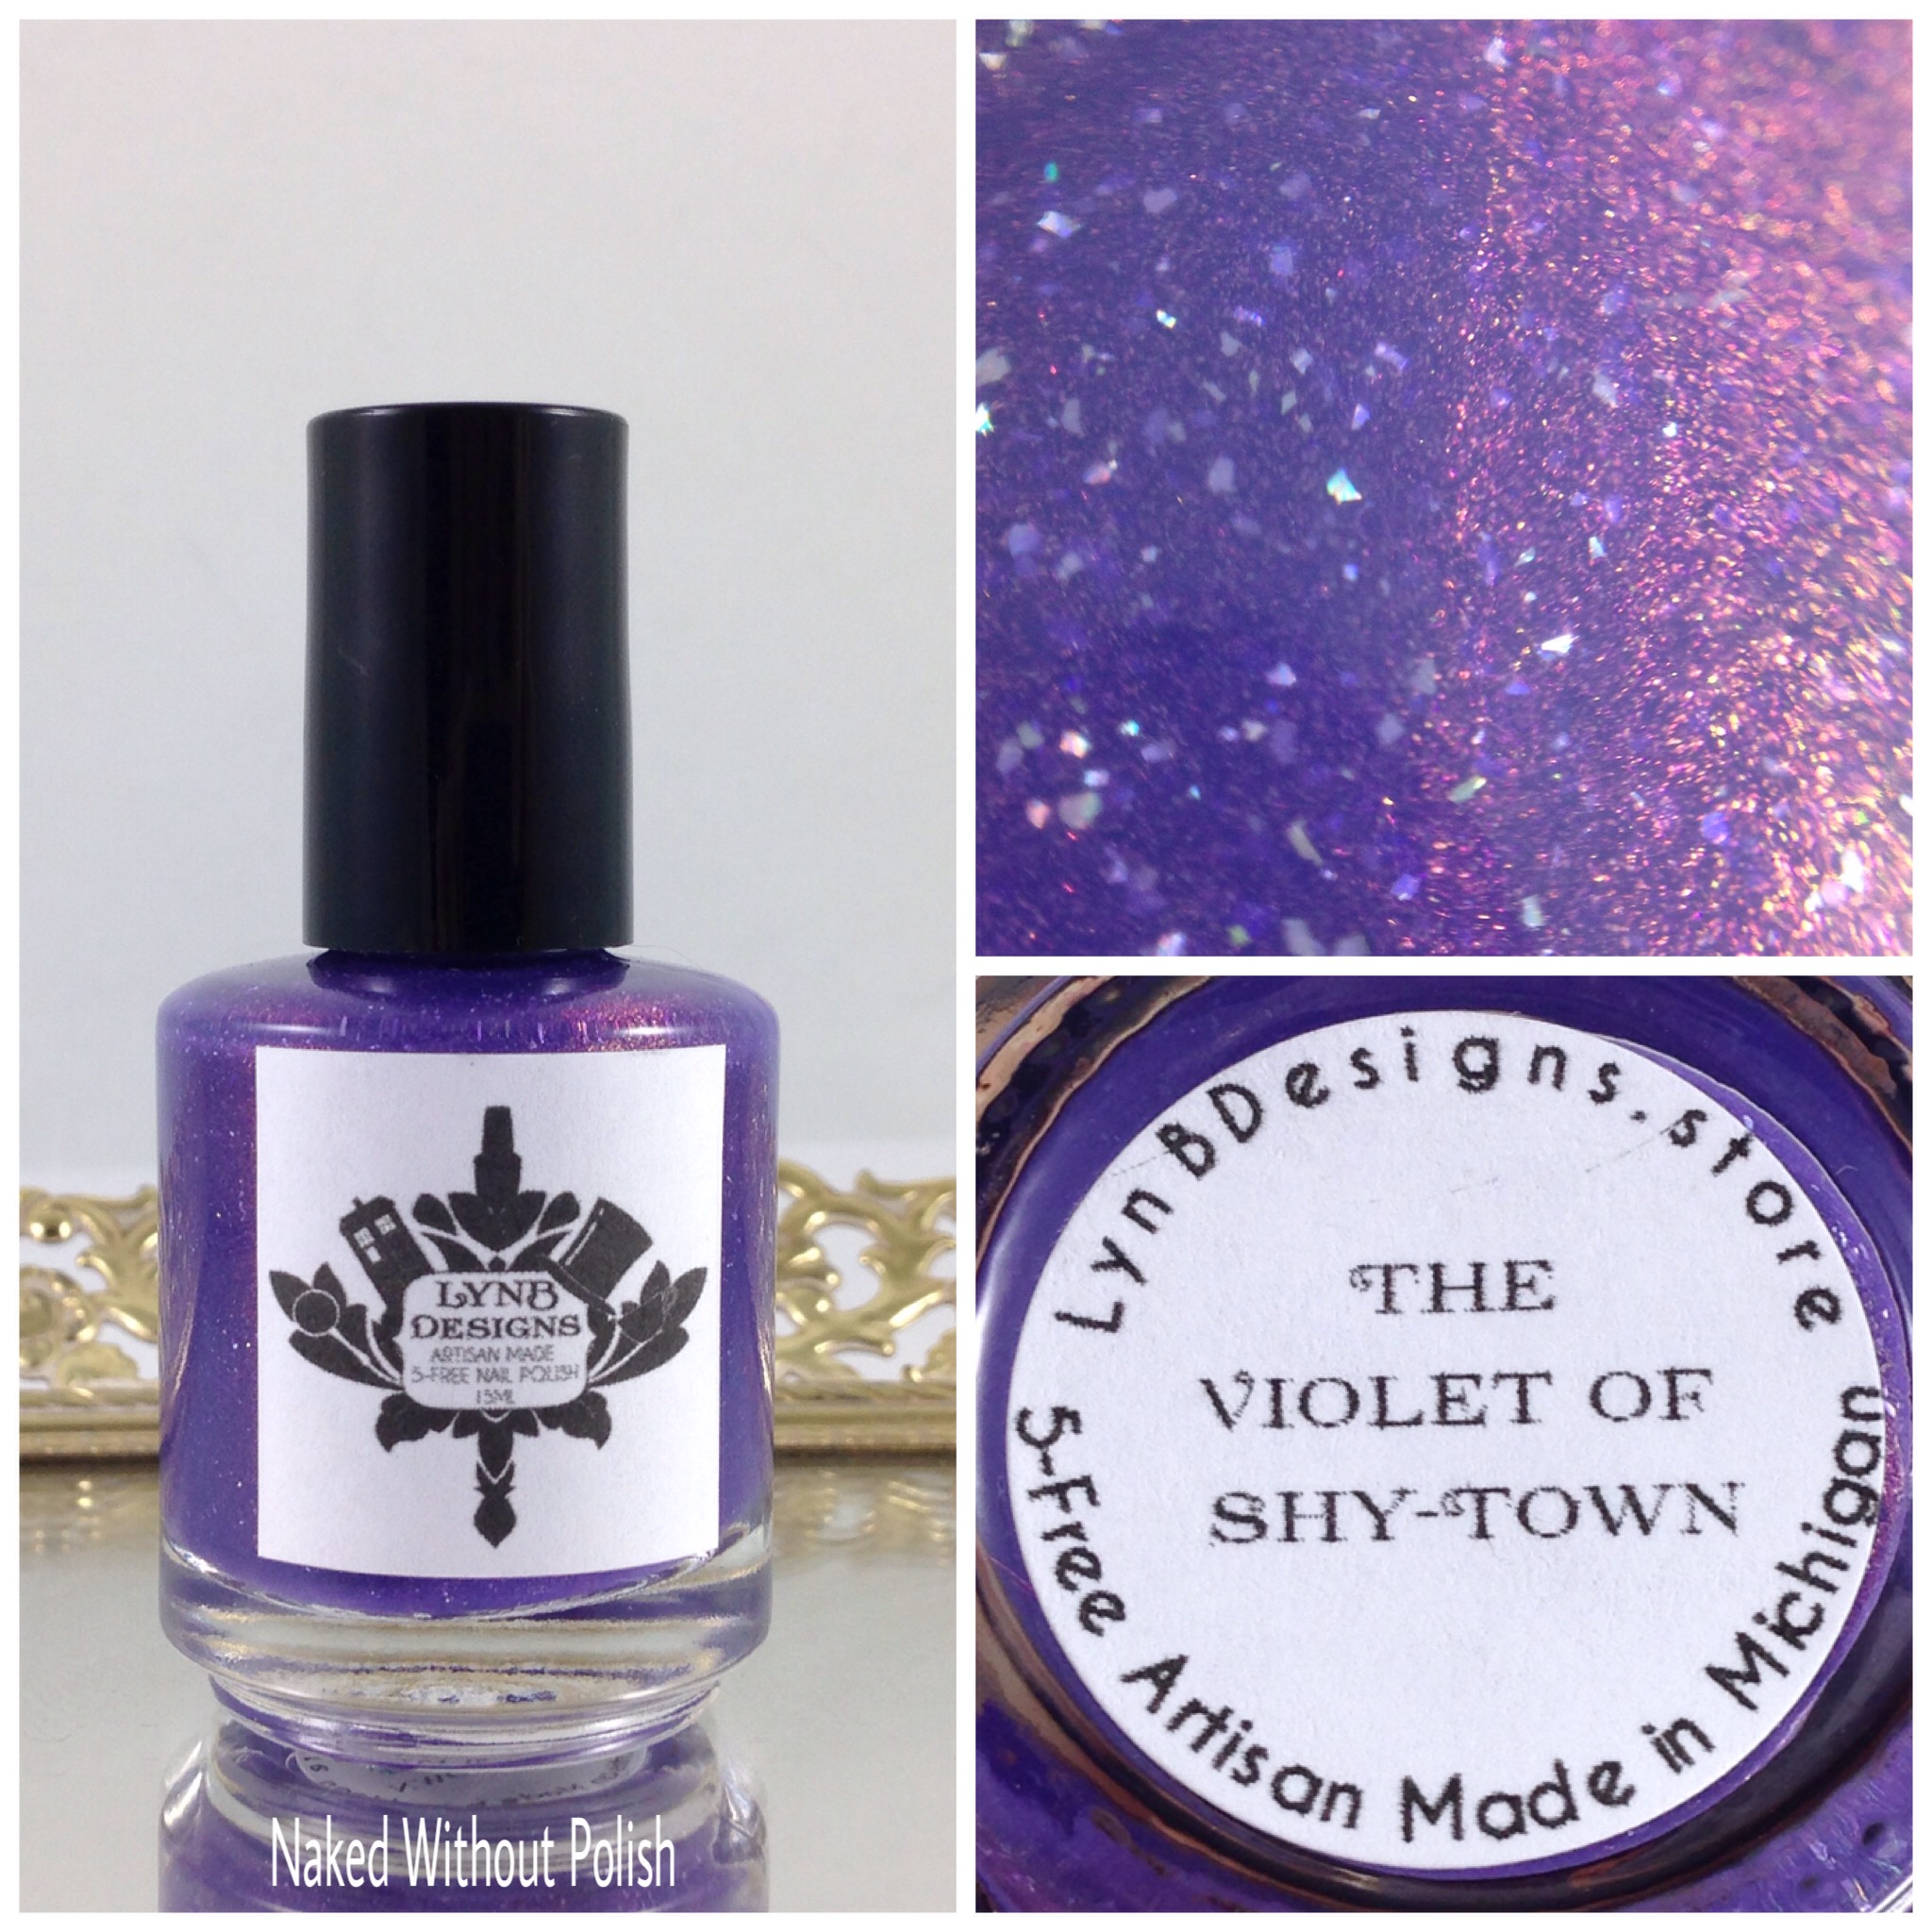 Road-to-Polish-Con-LynBDesigns-The-Violet-of-Shy-Town-1